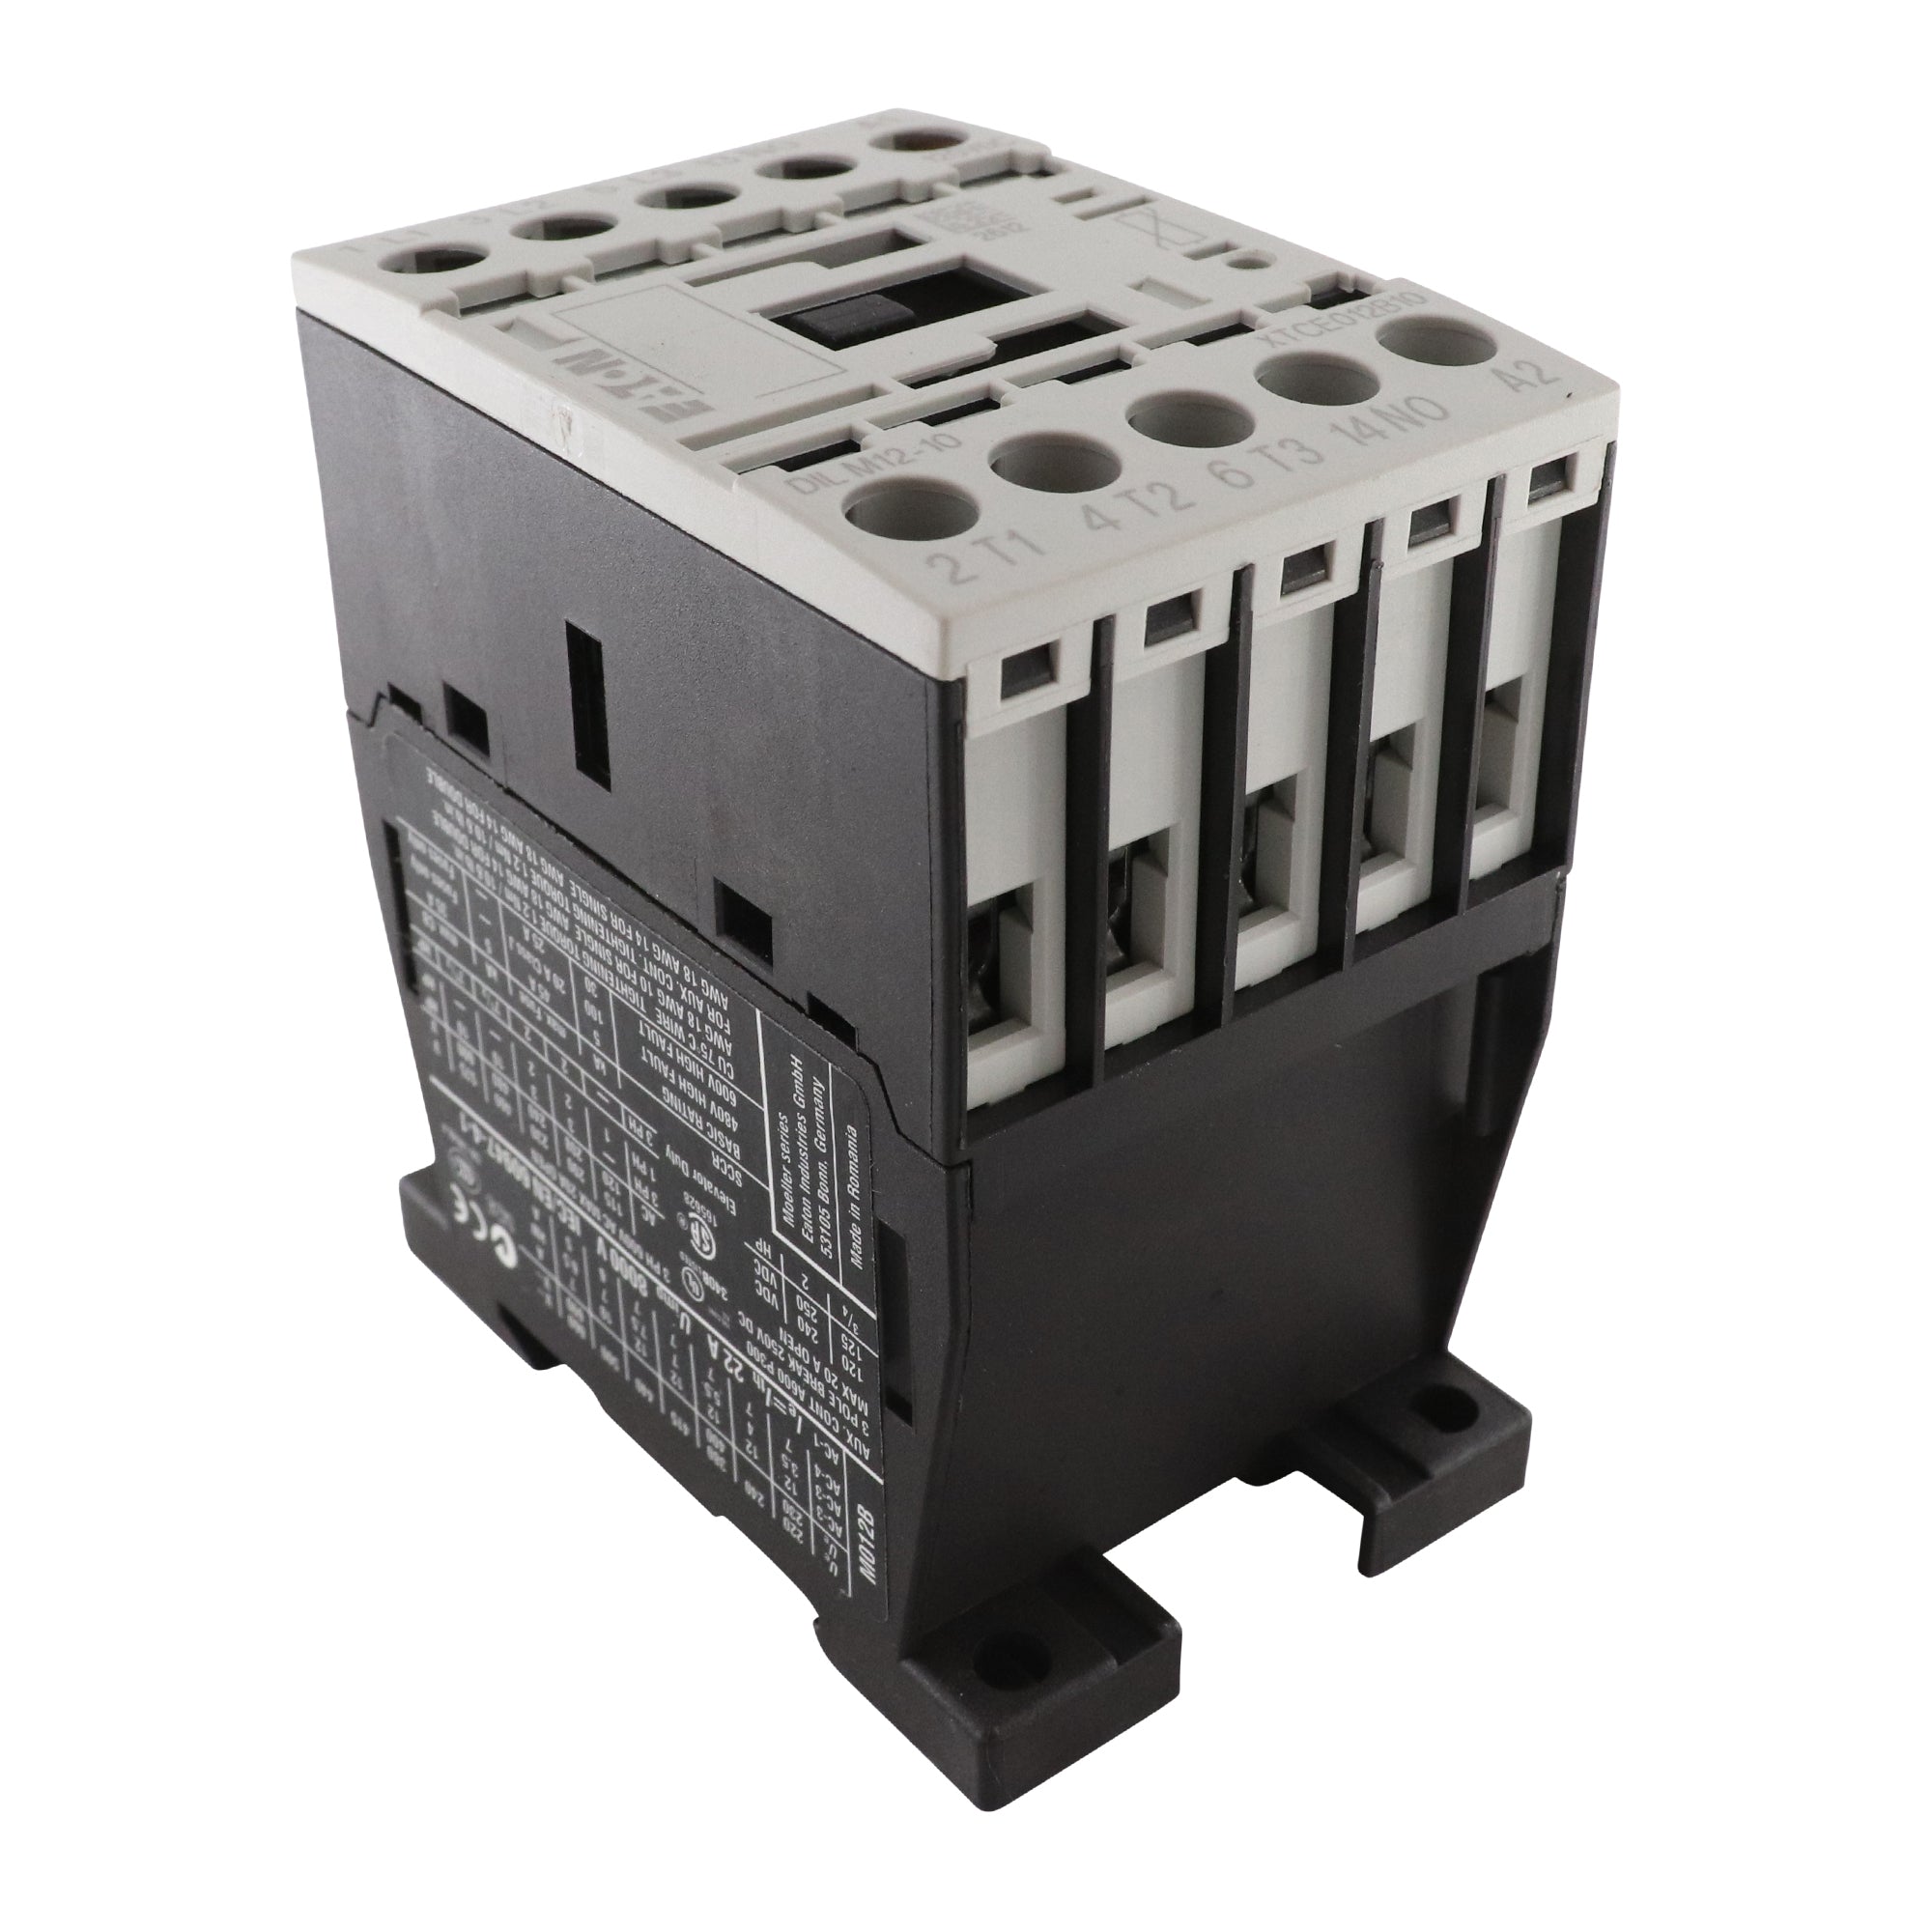 EATON, EATON XTCE012B10AD DILM12-10 DIN-MOUNT CONTACTOR, 5.5KW, 120VDC, 3-POLE, 20A